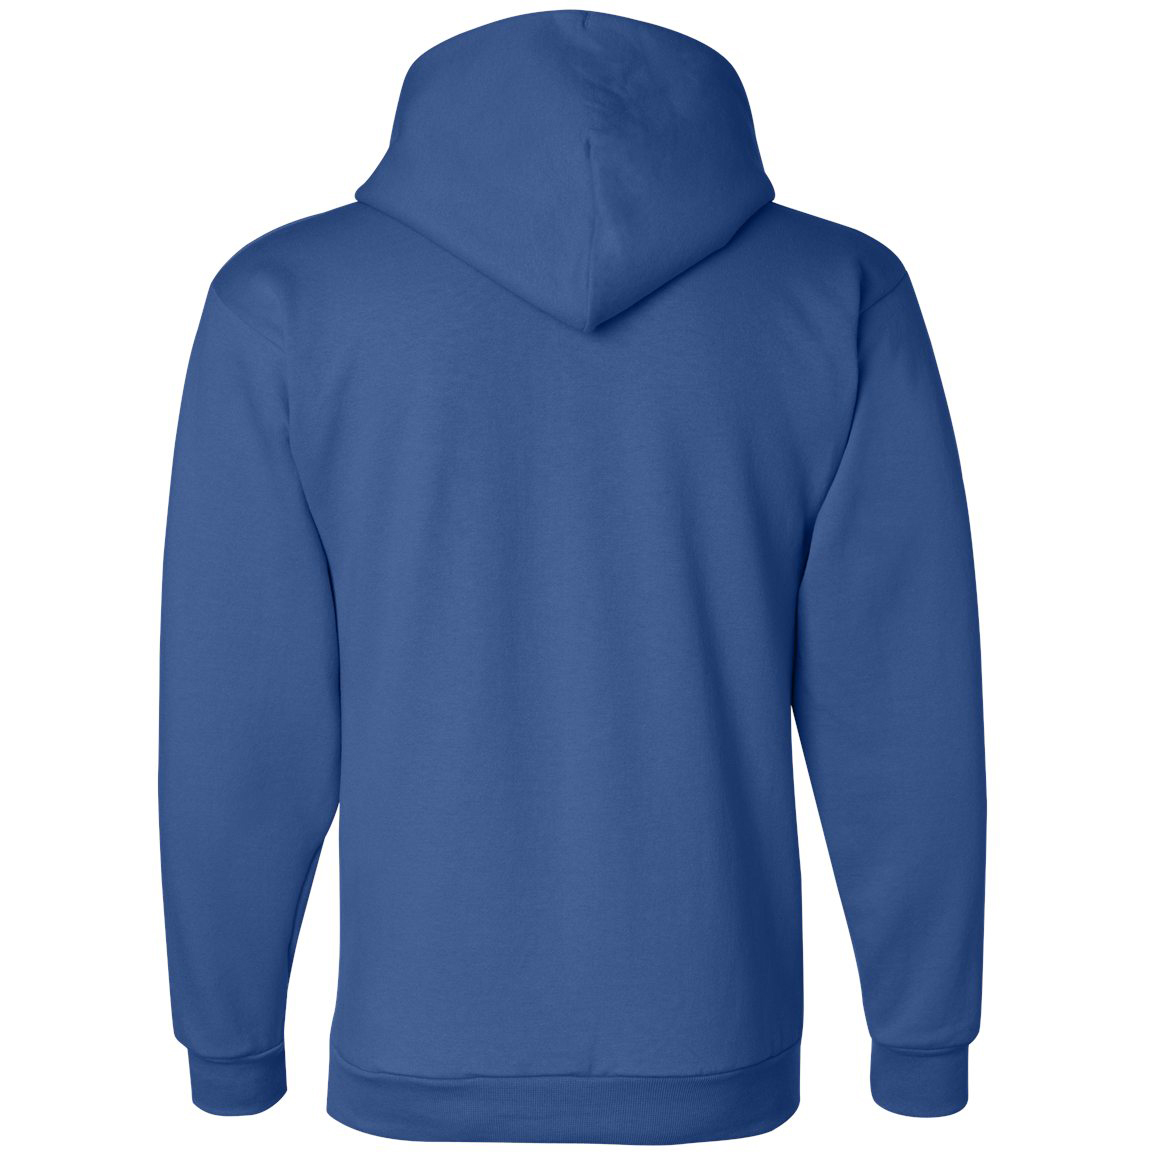 Champion S700 9 oz. Double Dry Eco Pullover Hood - Royal Blue - M